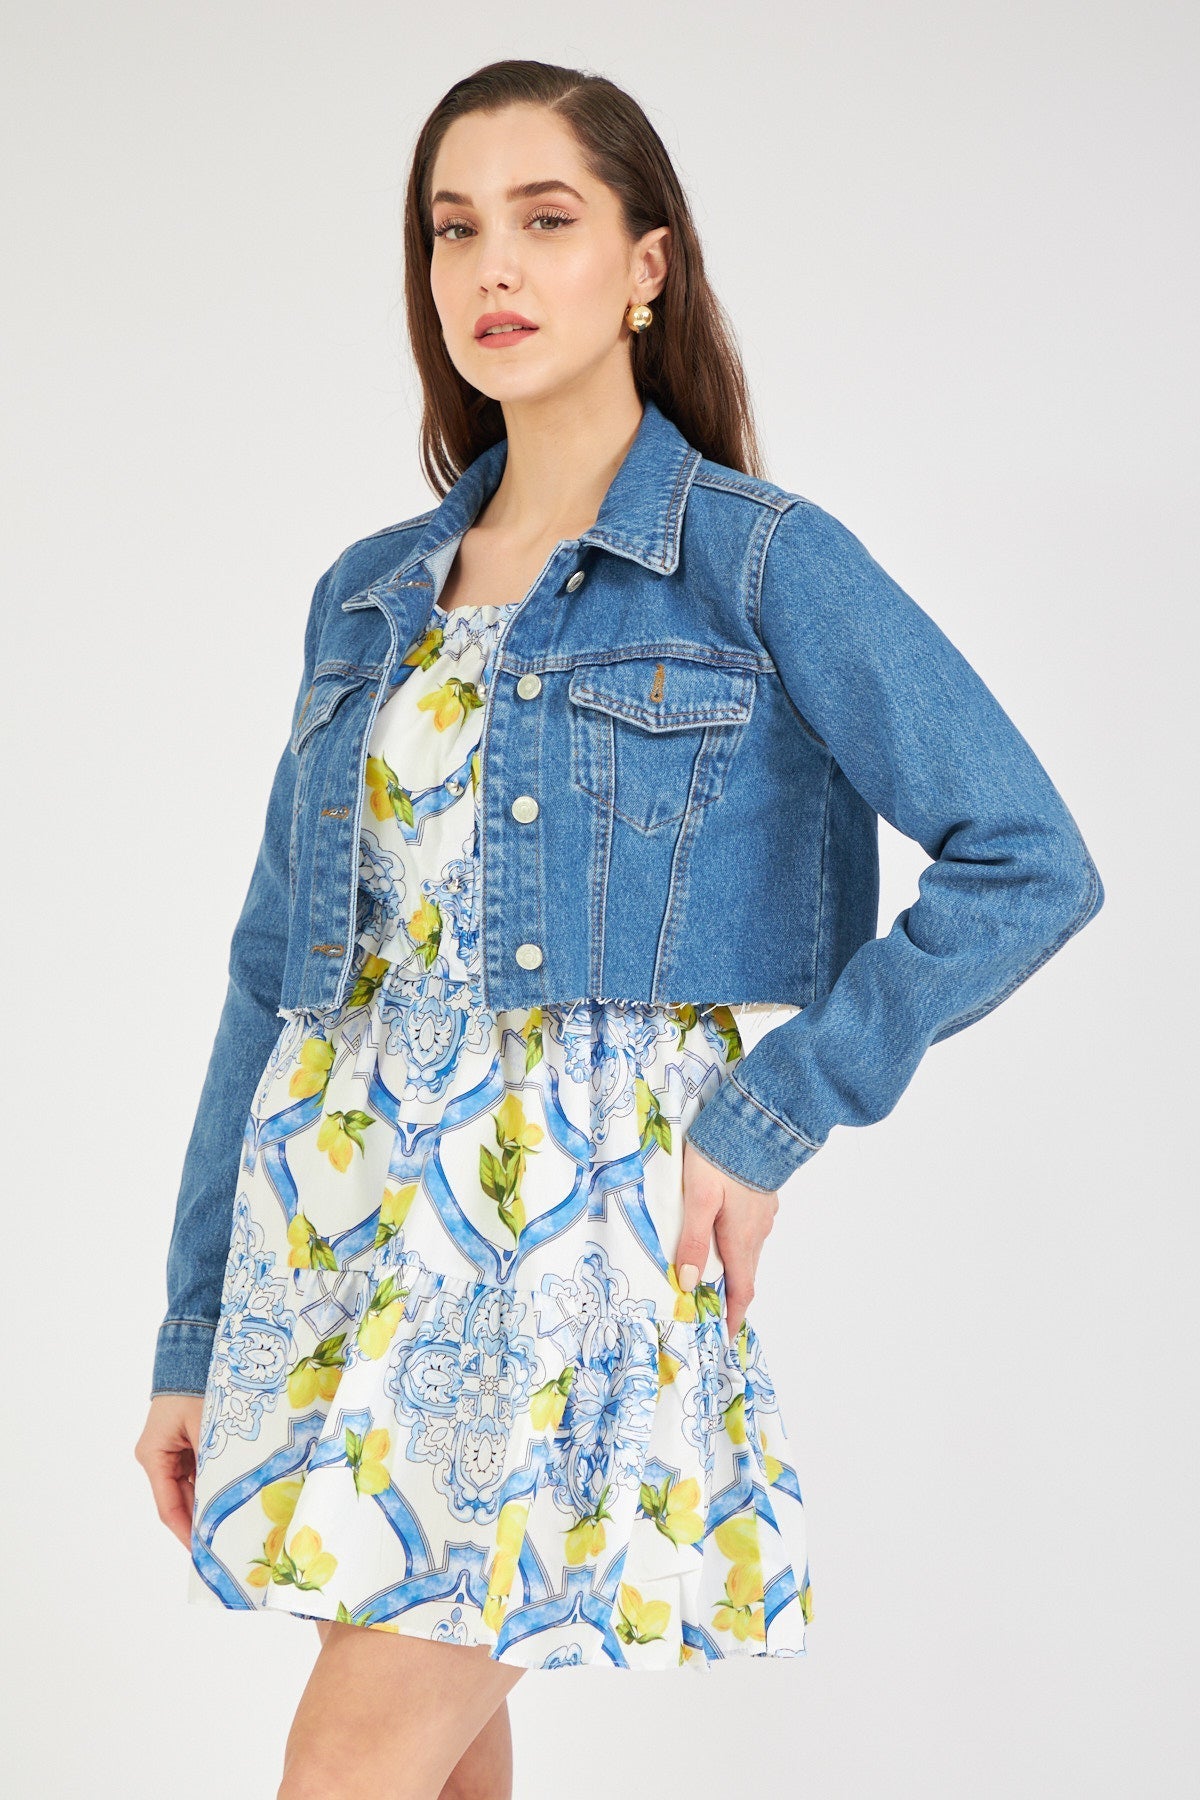 Women's Denim Jacket with Patchwork Pattern Detail on the Back - Lebbse